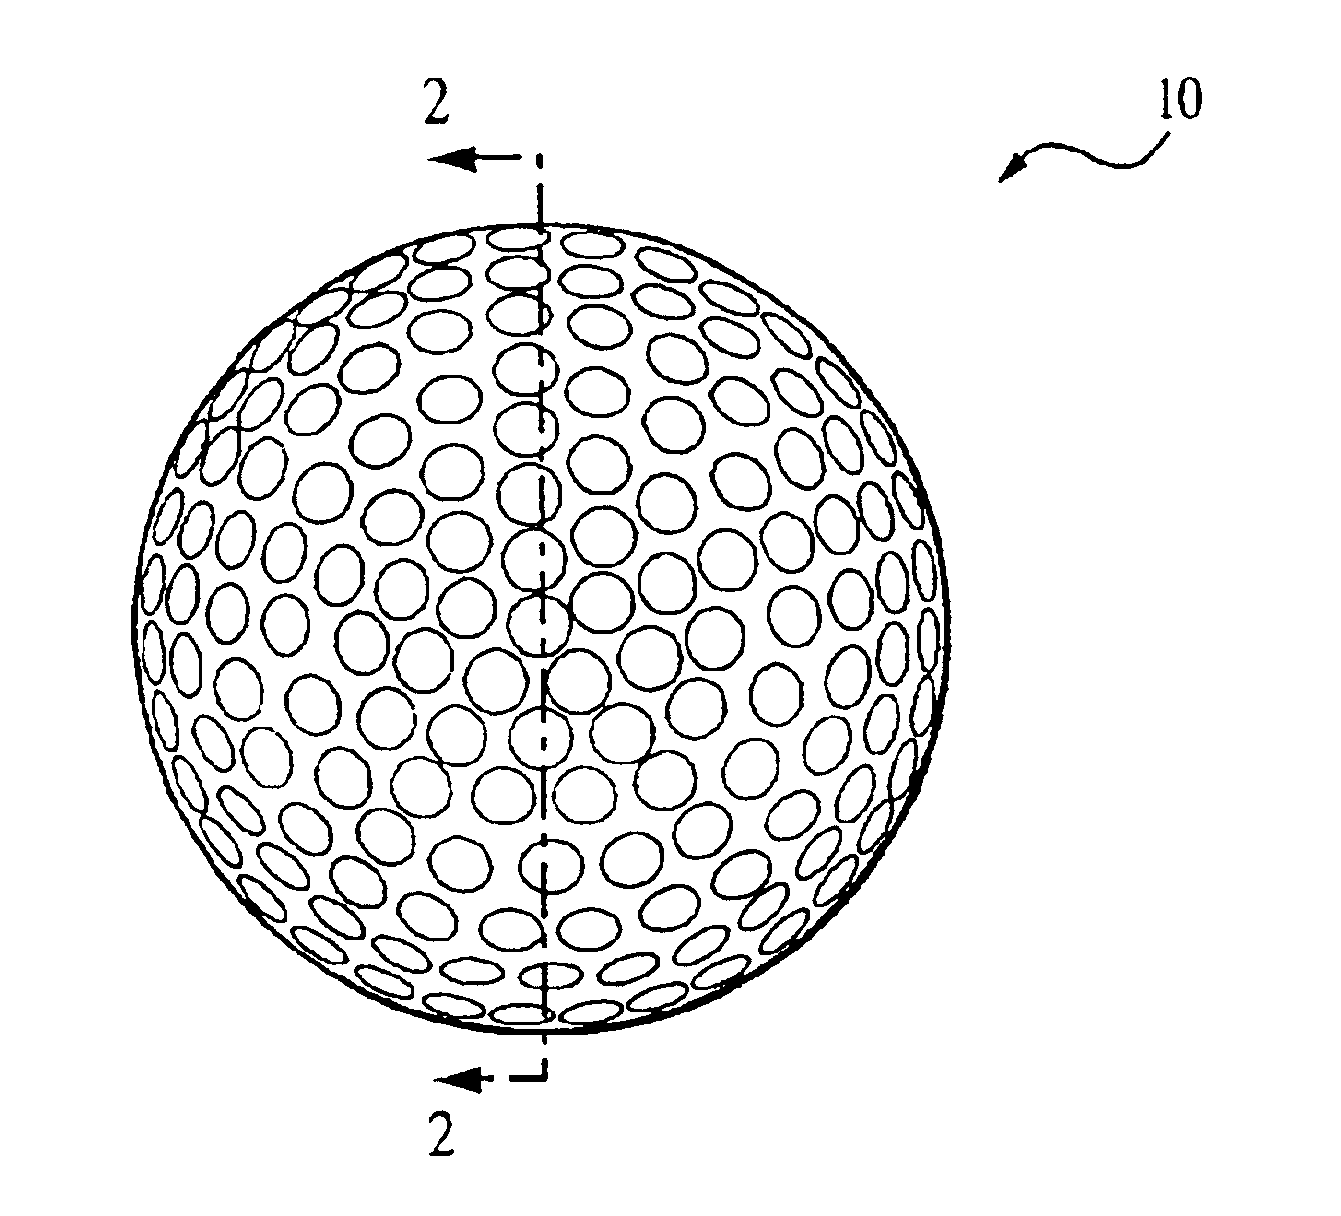 Golf ball with multi-layer cover